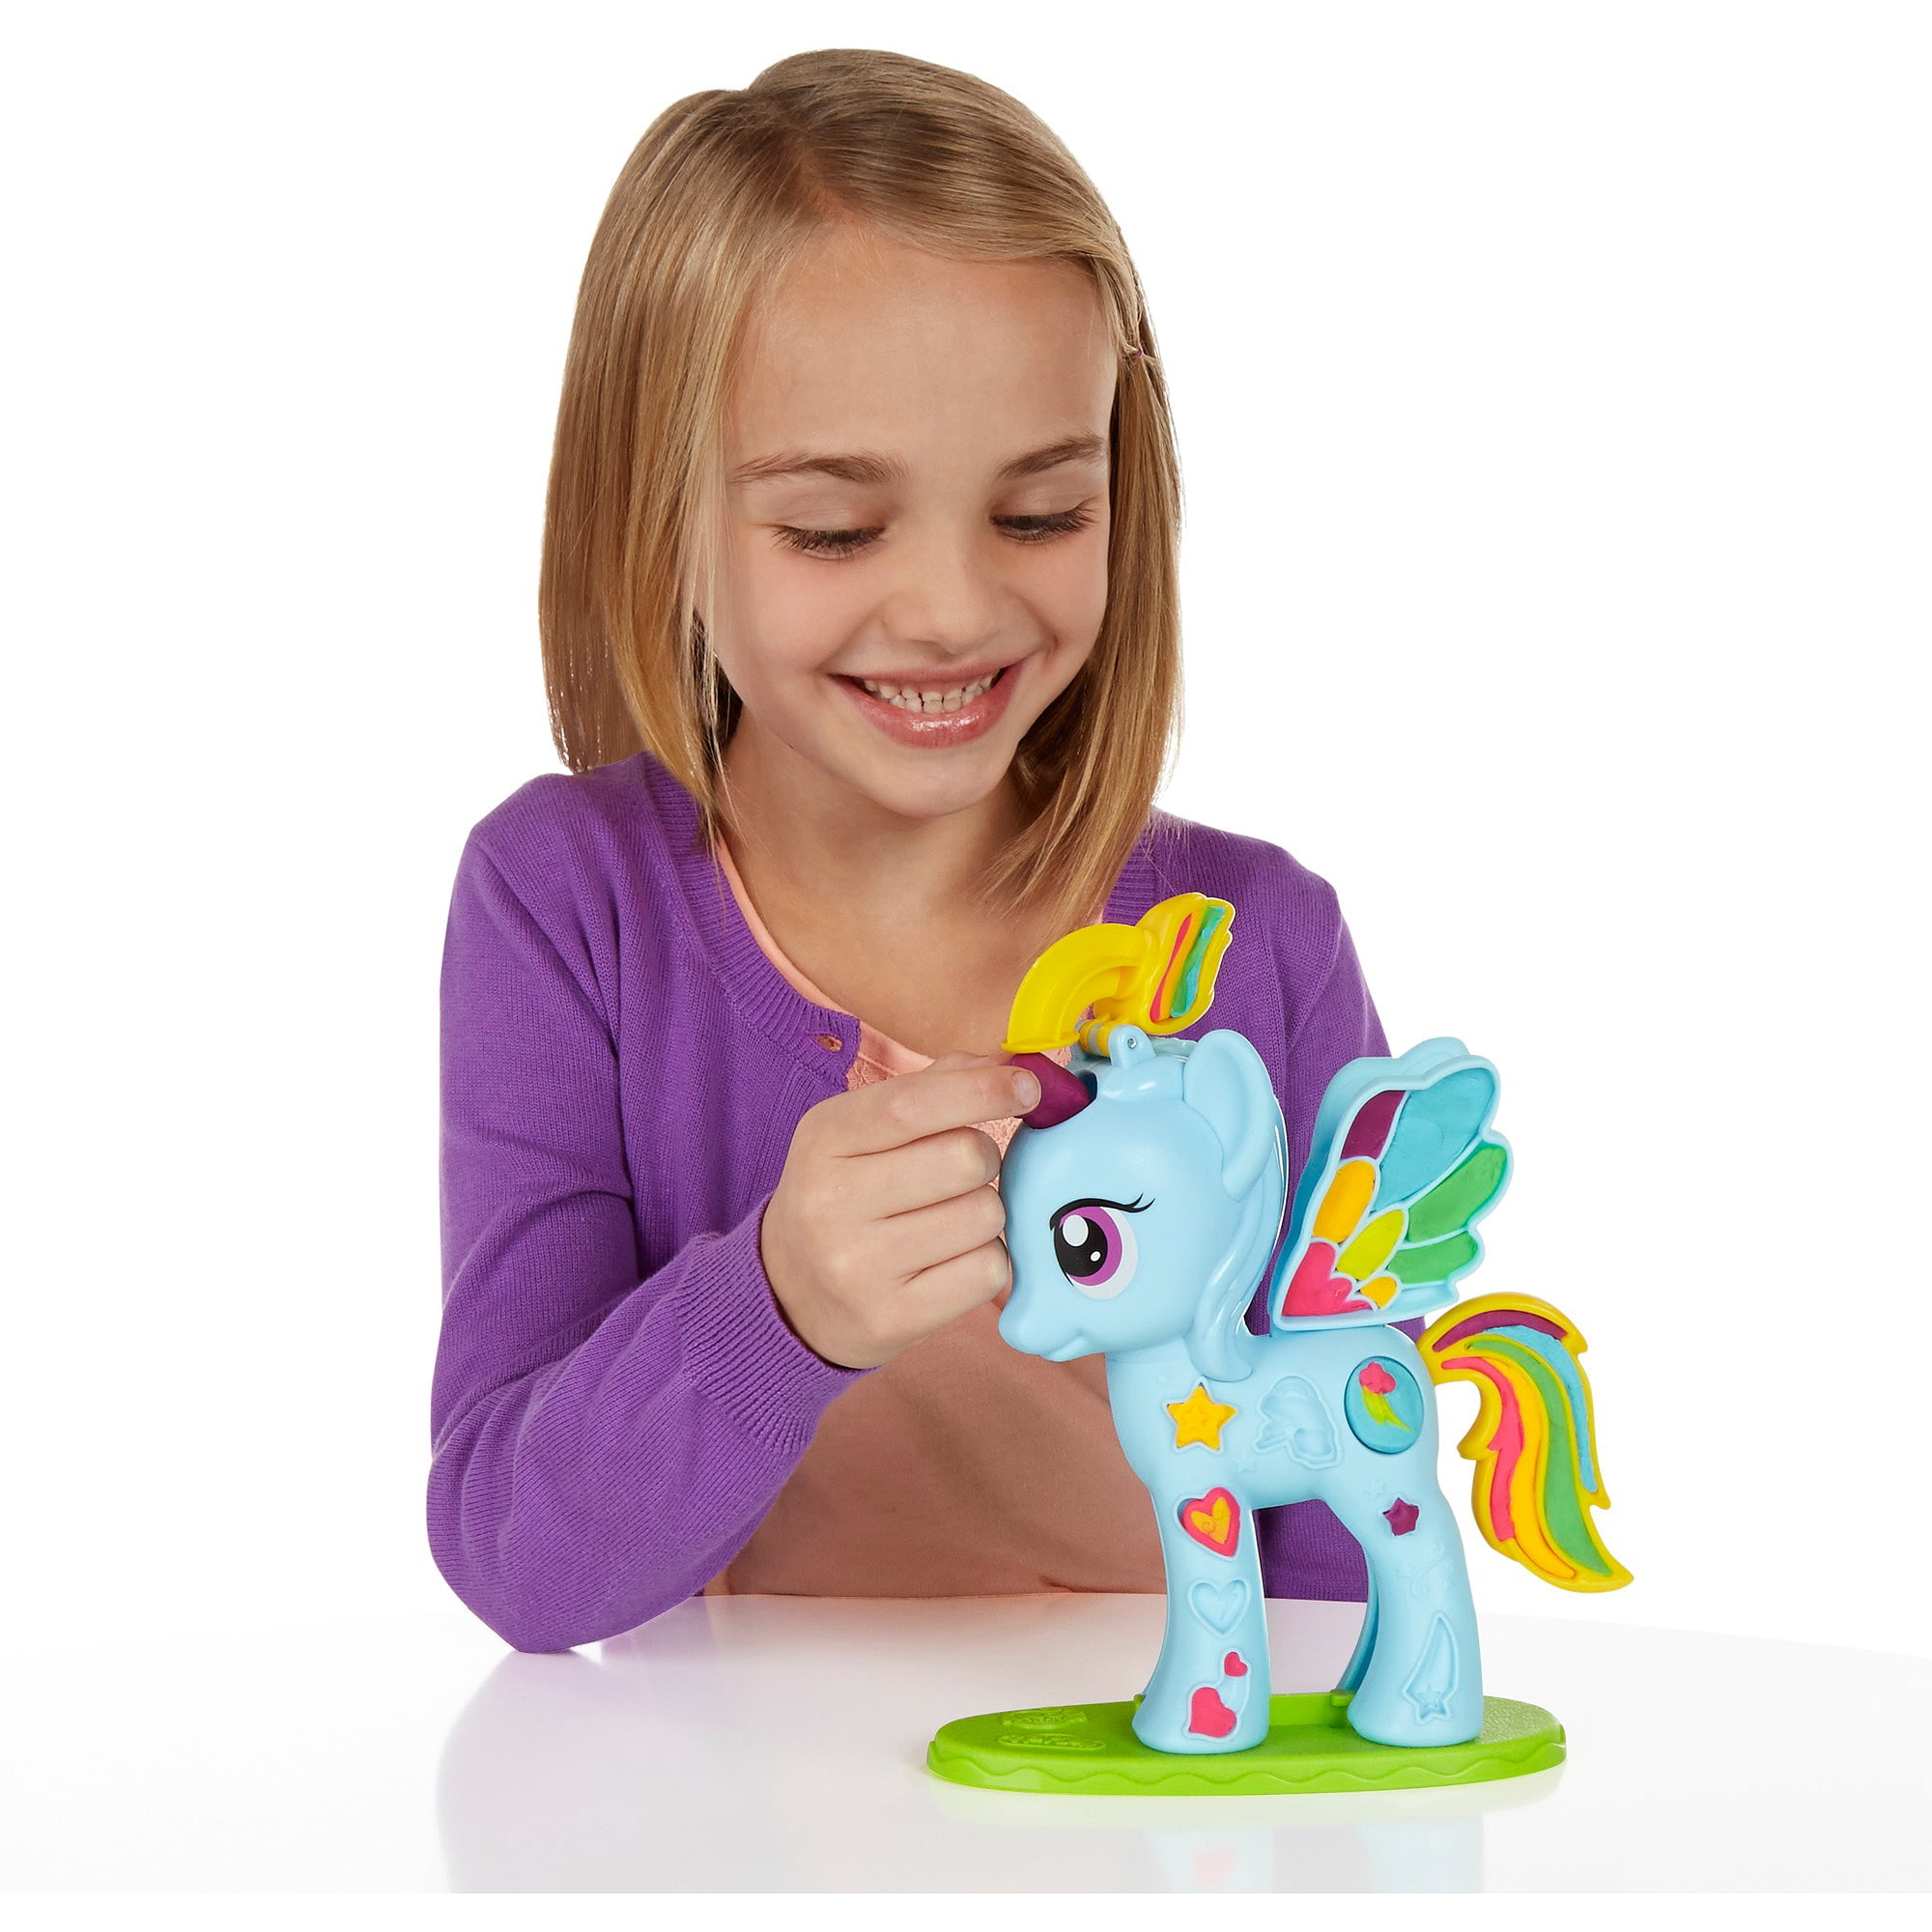 Play-Doh My Little Pony Rainbow Dash Style Salon Set with 6 Cans of Sparkle  Play-Doh 